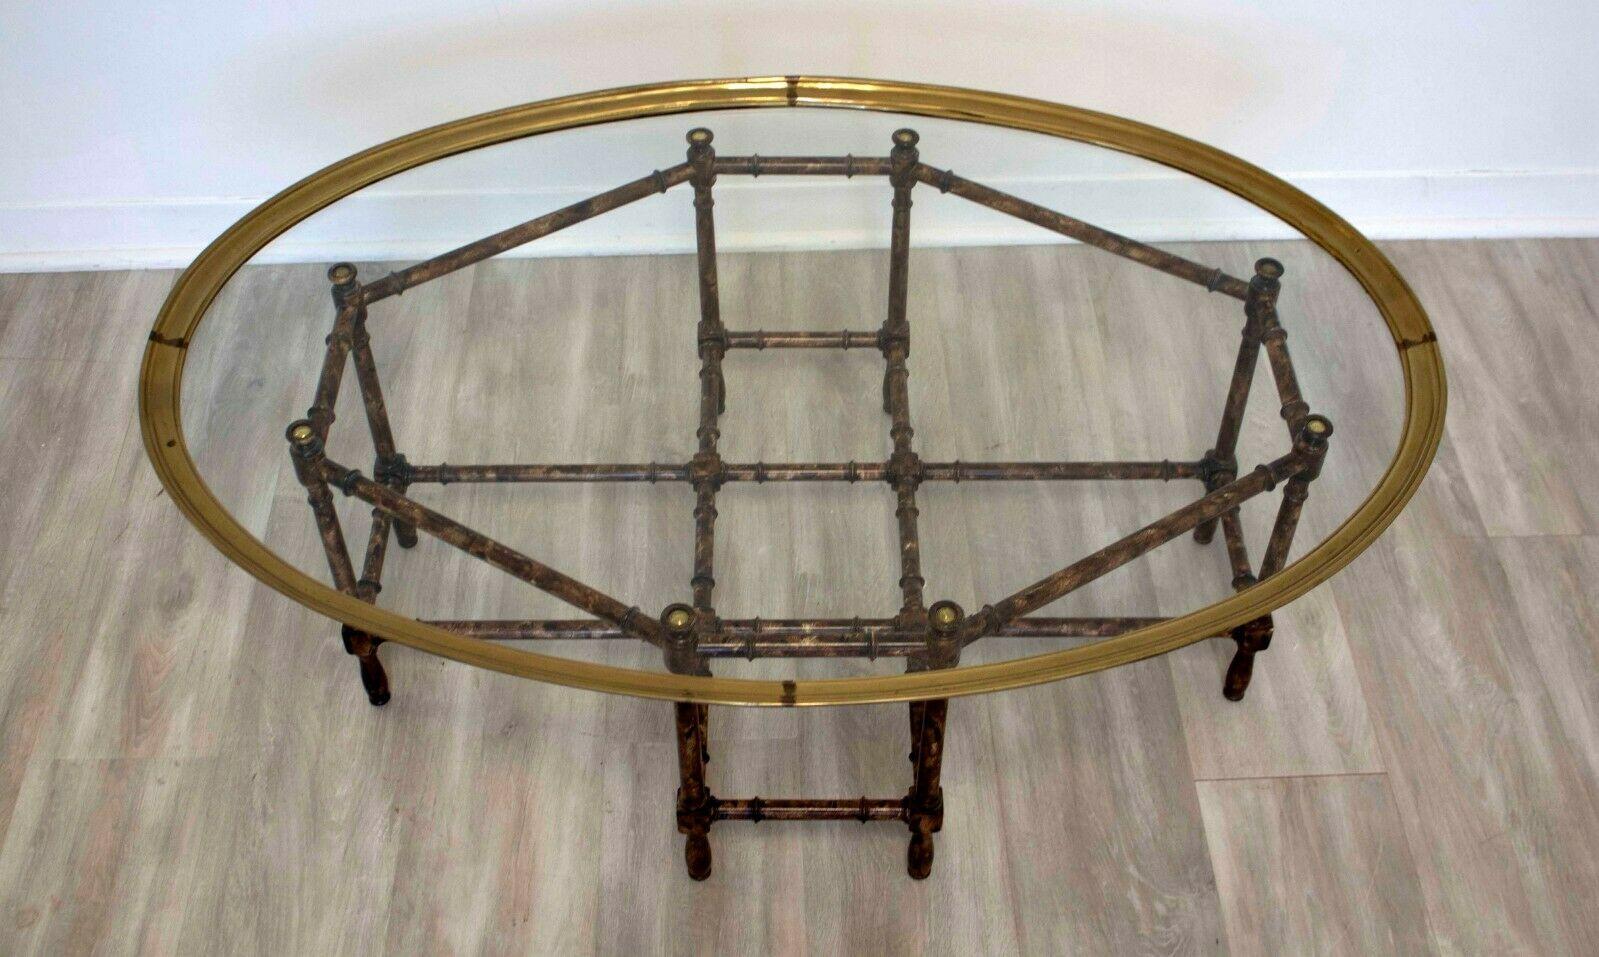 This lovely Baker, Chippendale style coffee table is detailed with a faux bamboo base made of brass with a glass and matching brass oval top. This style would work well in any Hollywood Regency style home. In good vintage condition, it measures 44 W